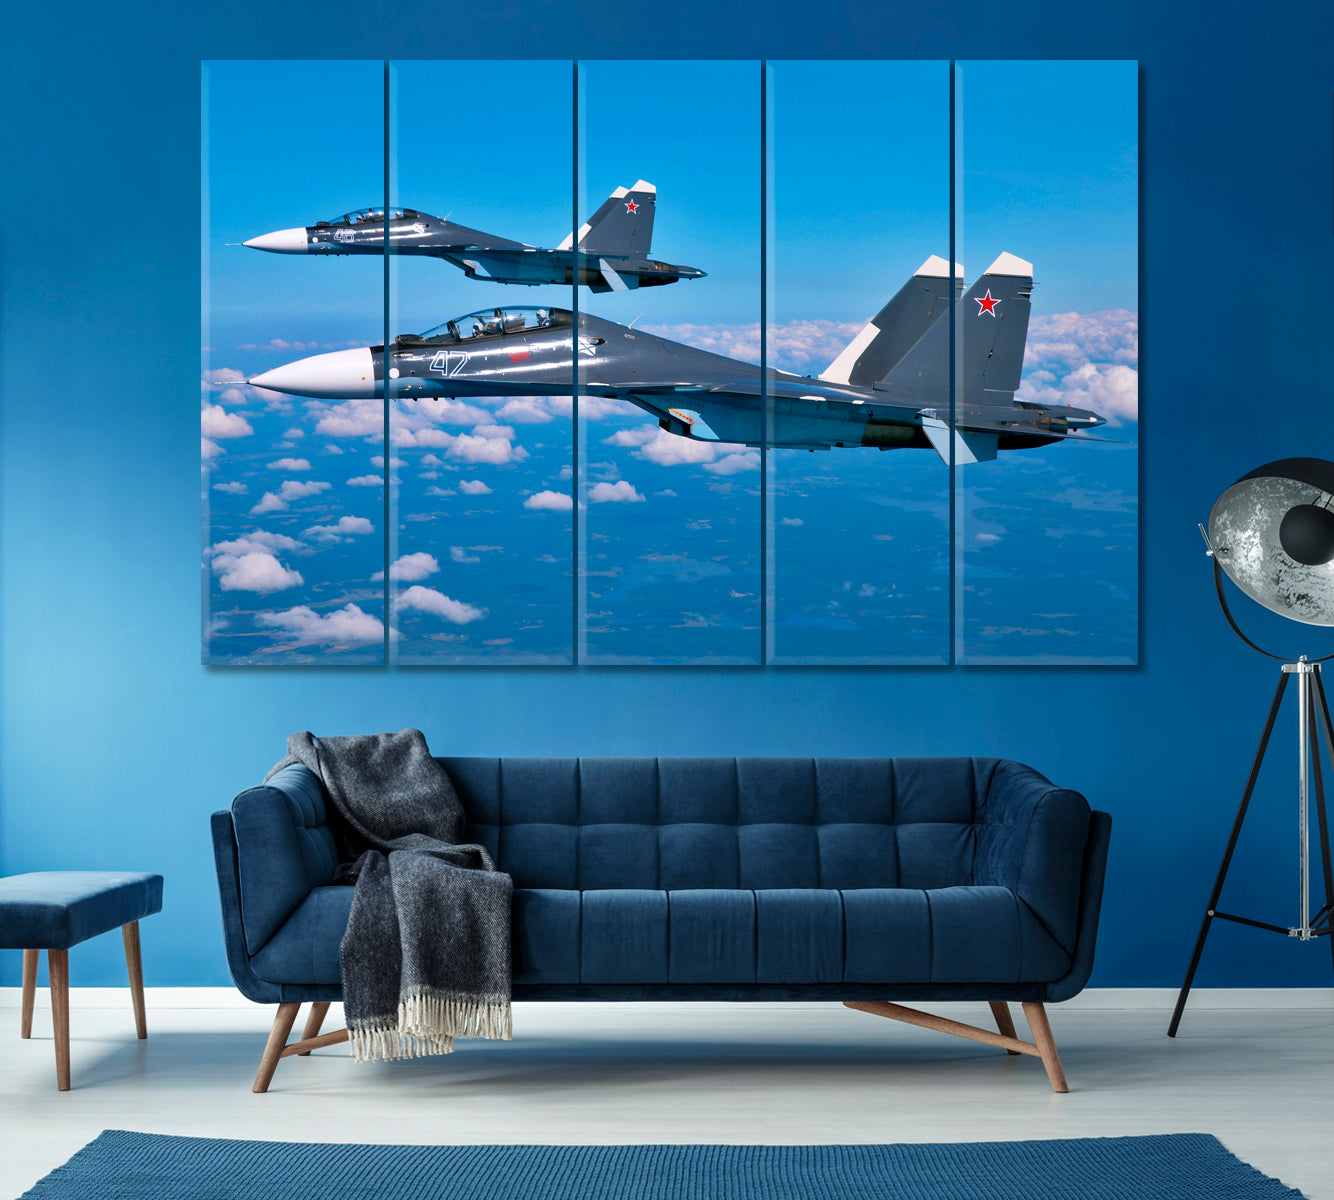 Sukhoi Su-30SM (Flanker-C) Jet in Flight Canvas Print ArtLexy 5 Panels 36"x24" inches 